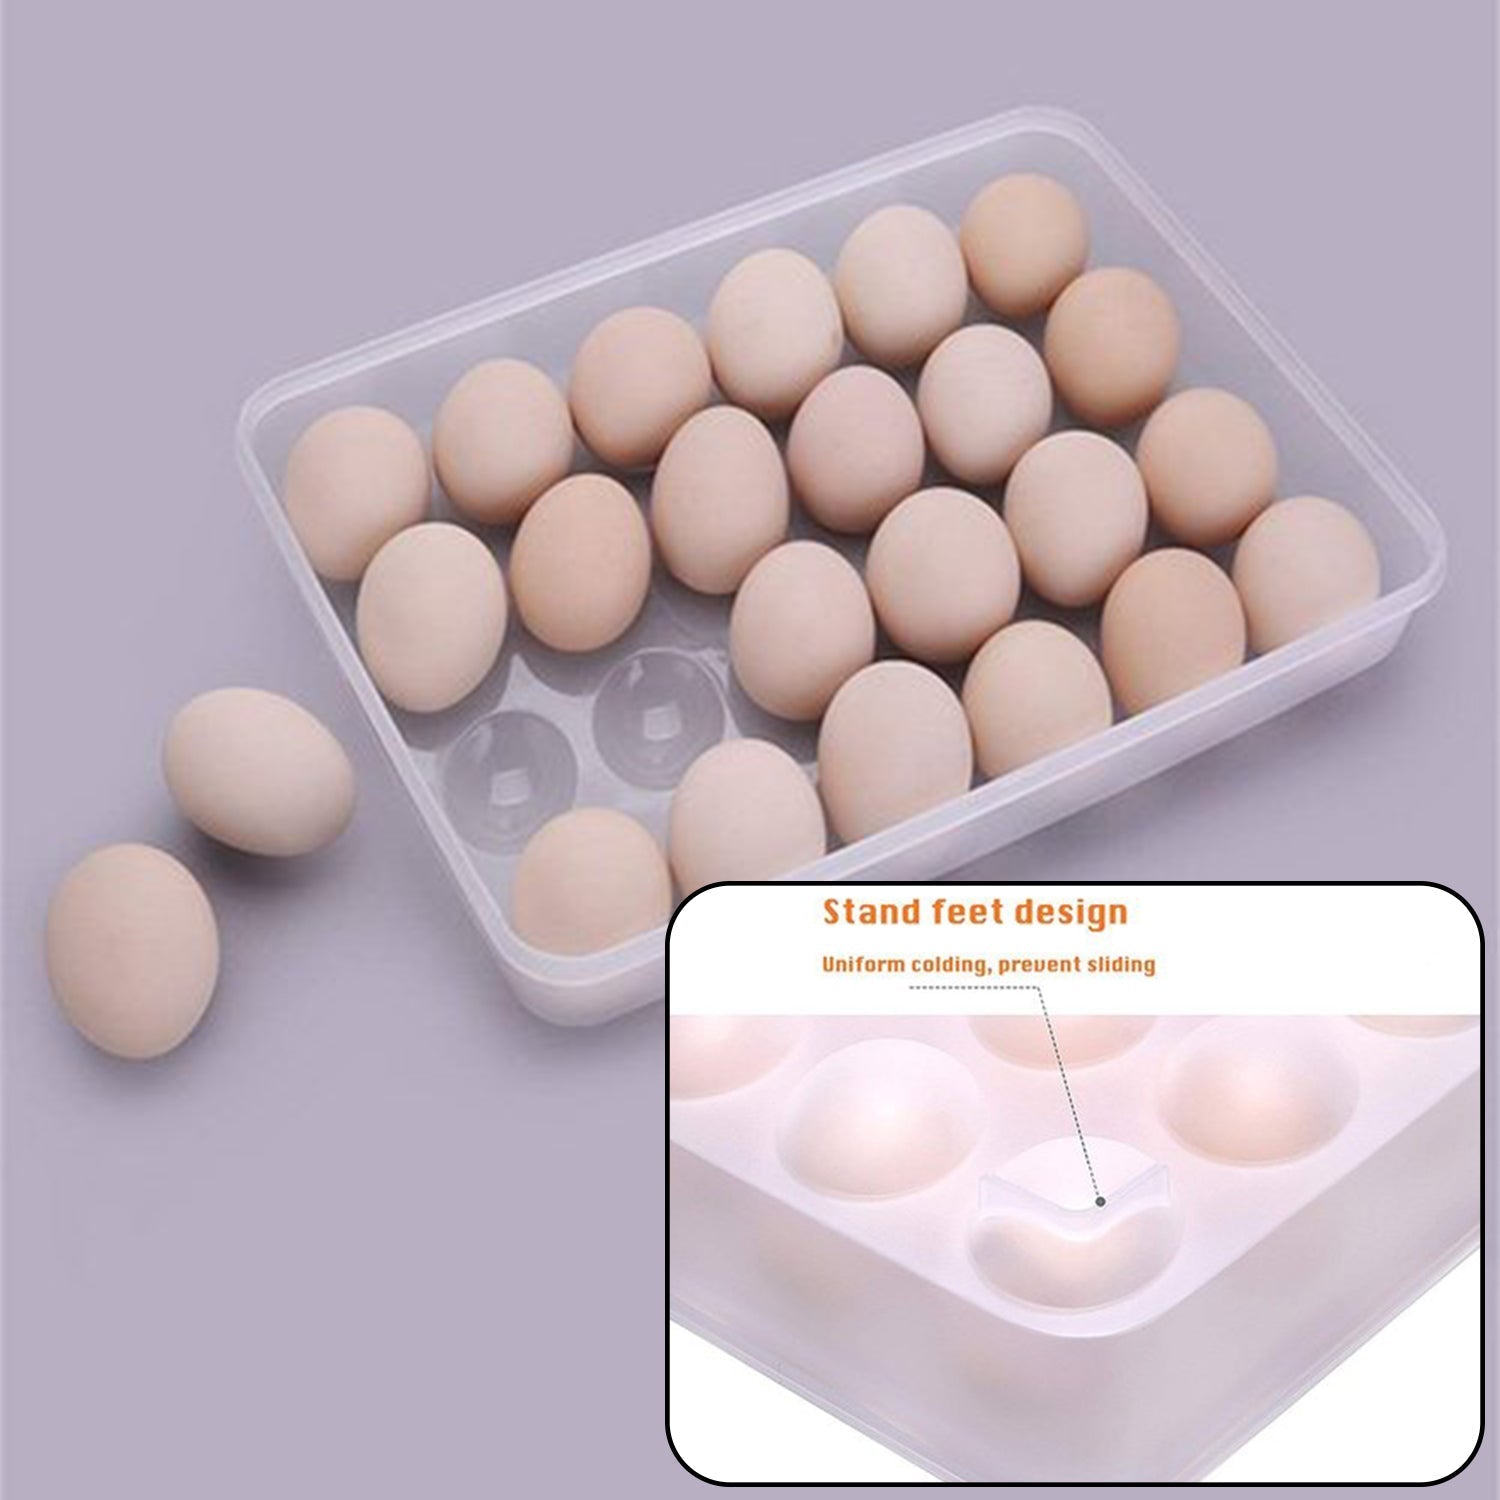 2645 24 Grids Plastic Egg Box Container Holder Tray for Fridge with Lid for 2 Dozen Egg Tray